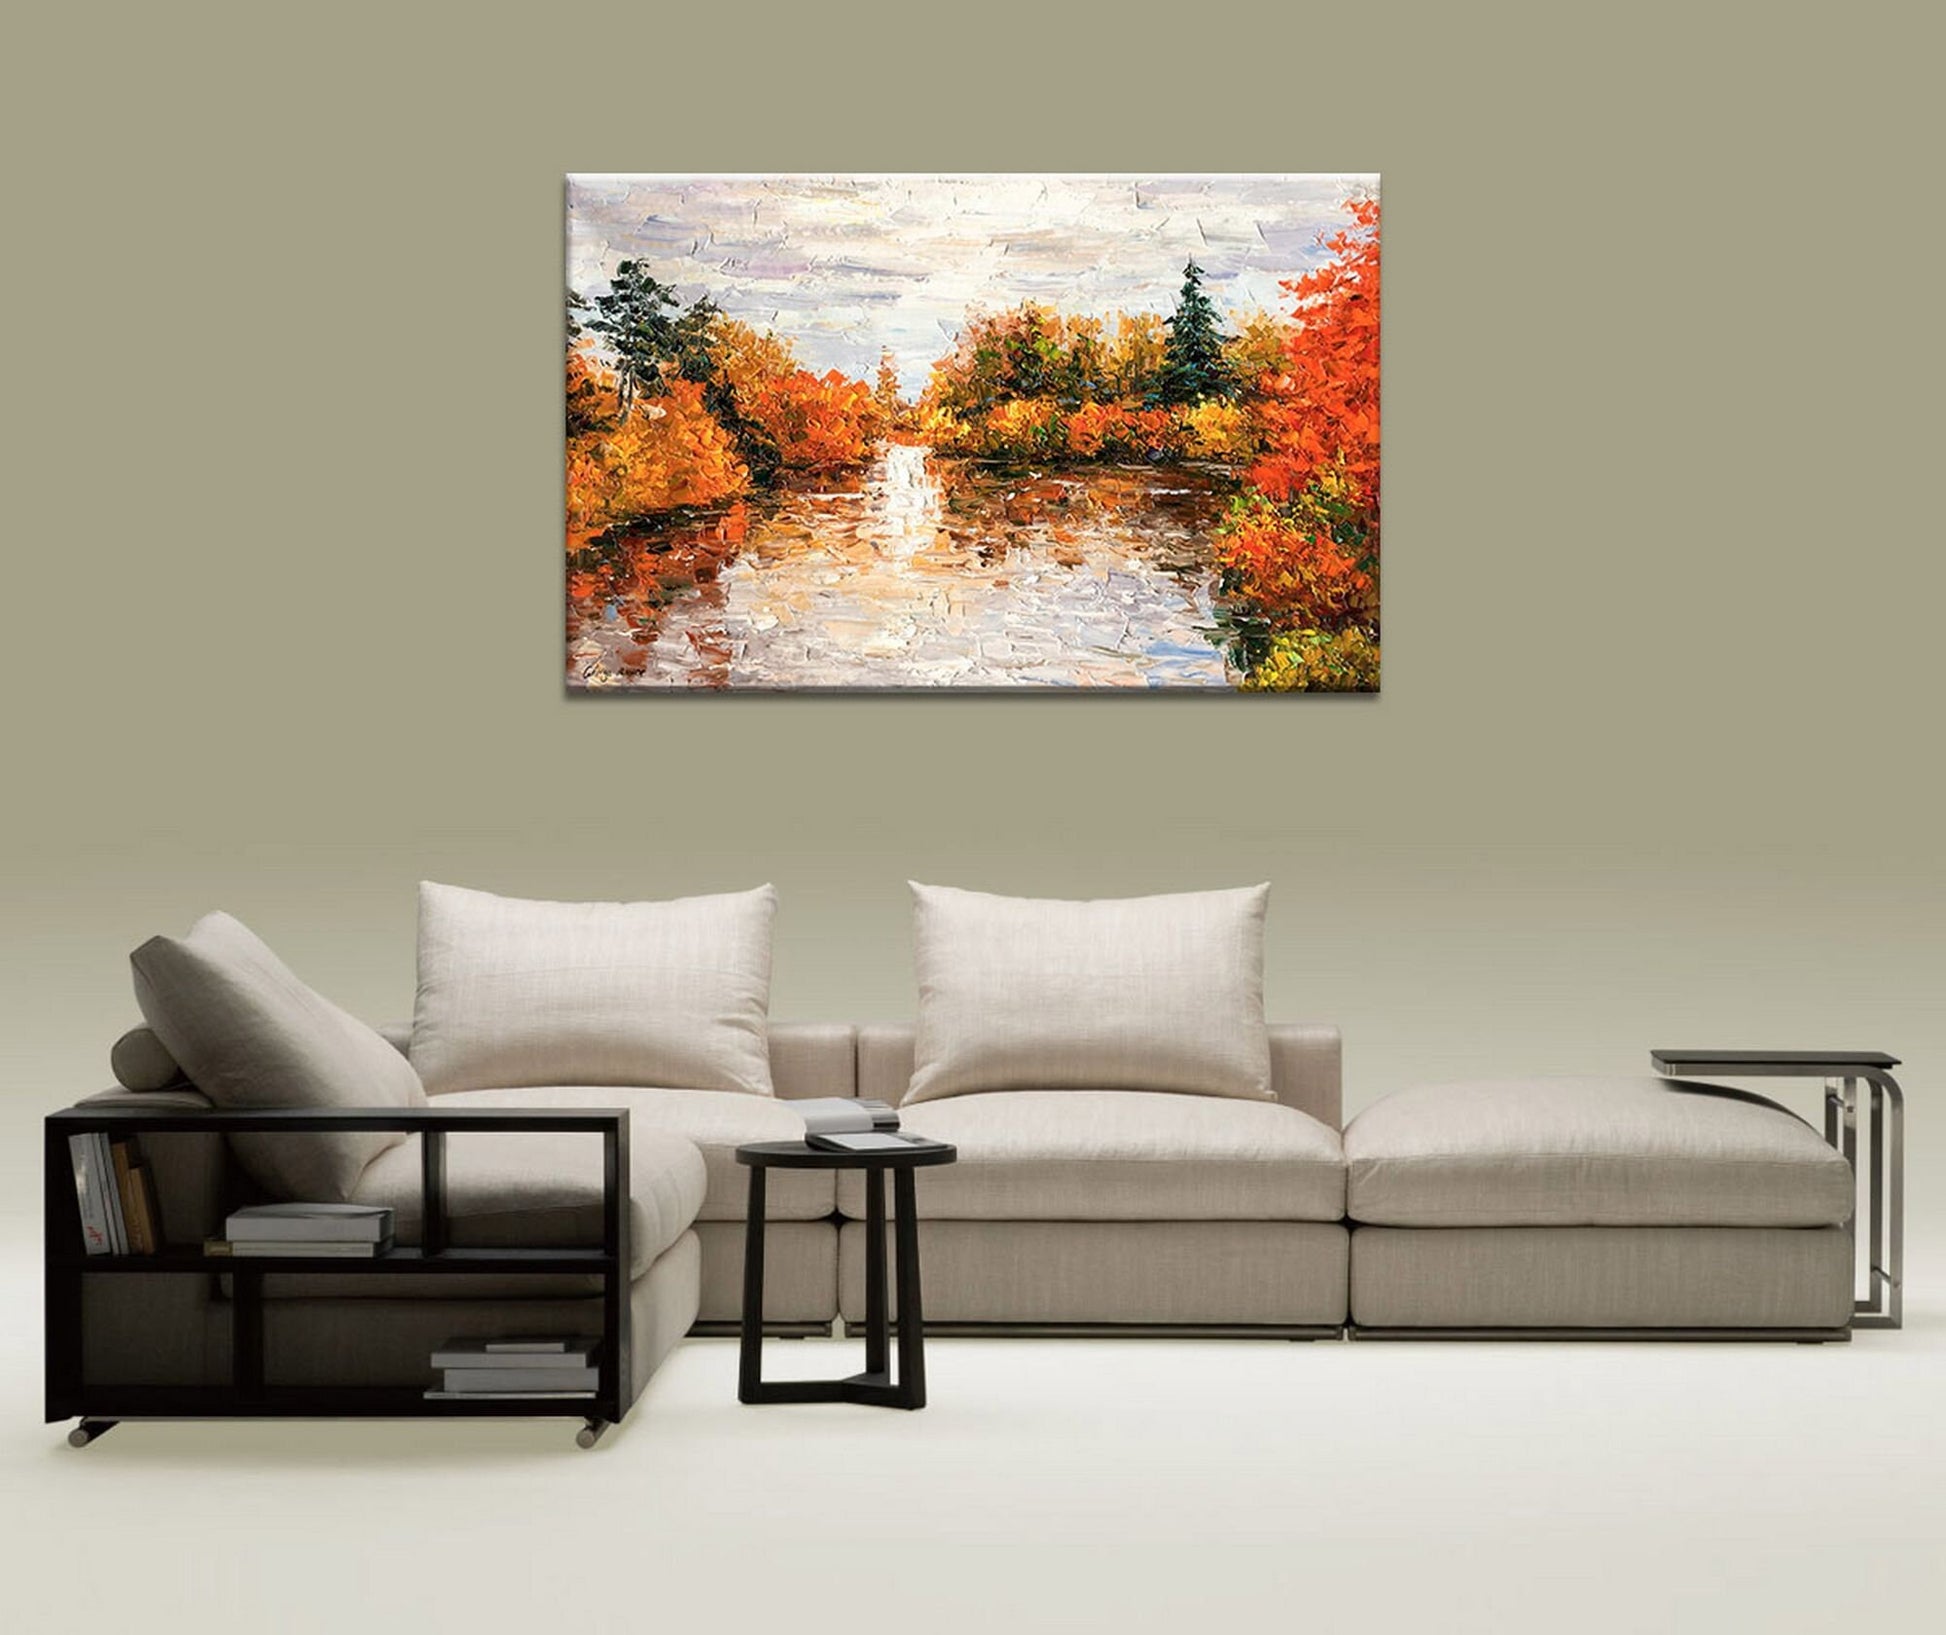 Large Landscape Oil Painting Autumn Forest by the River, Abstract Painting, Abstract Wall Art, Kitchen Wall Decor, Modern Painting, Orange